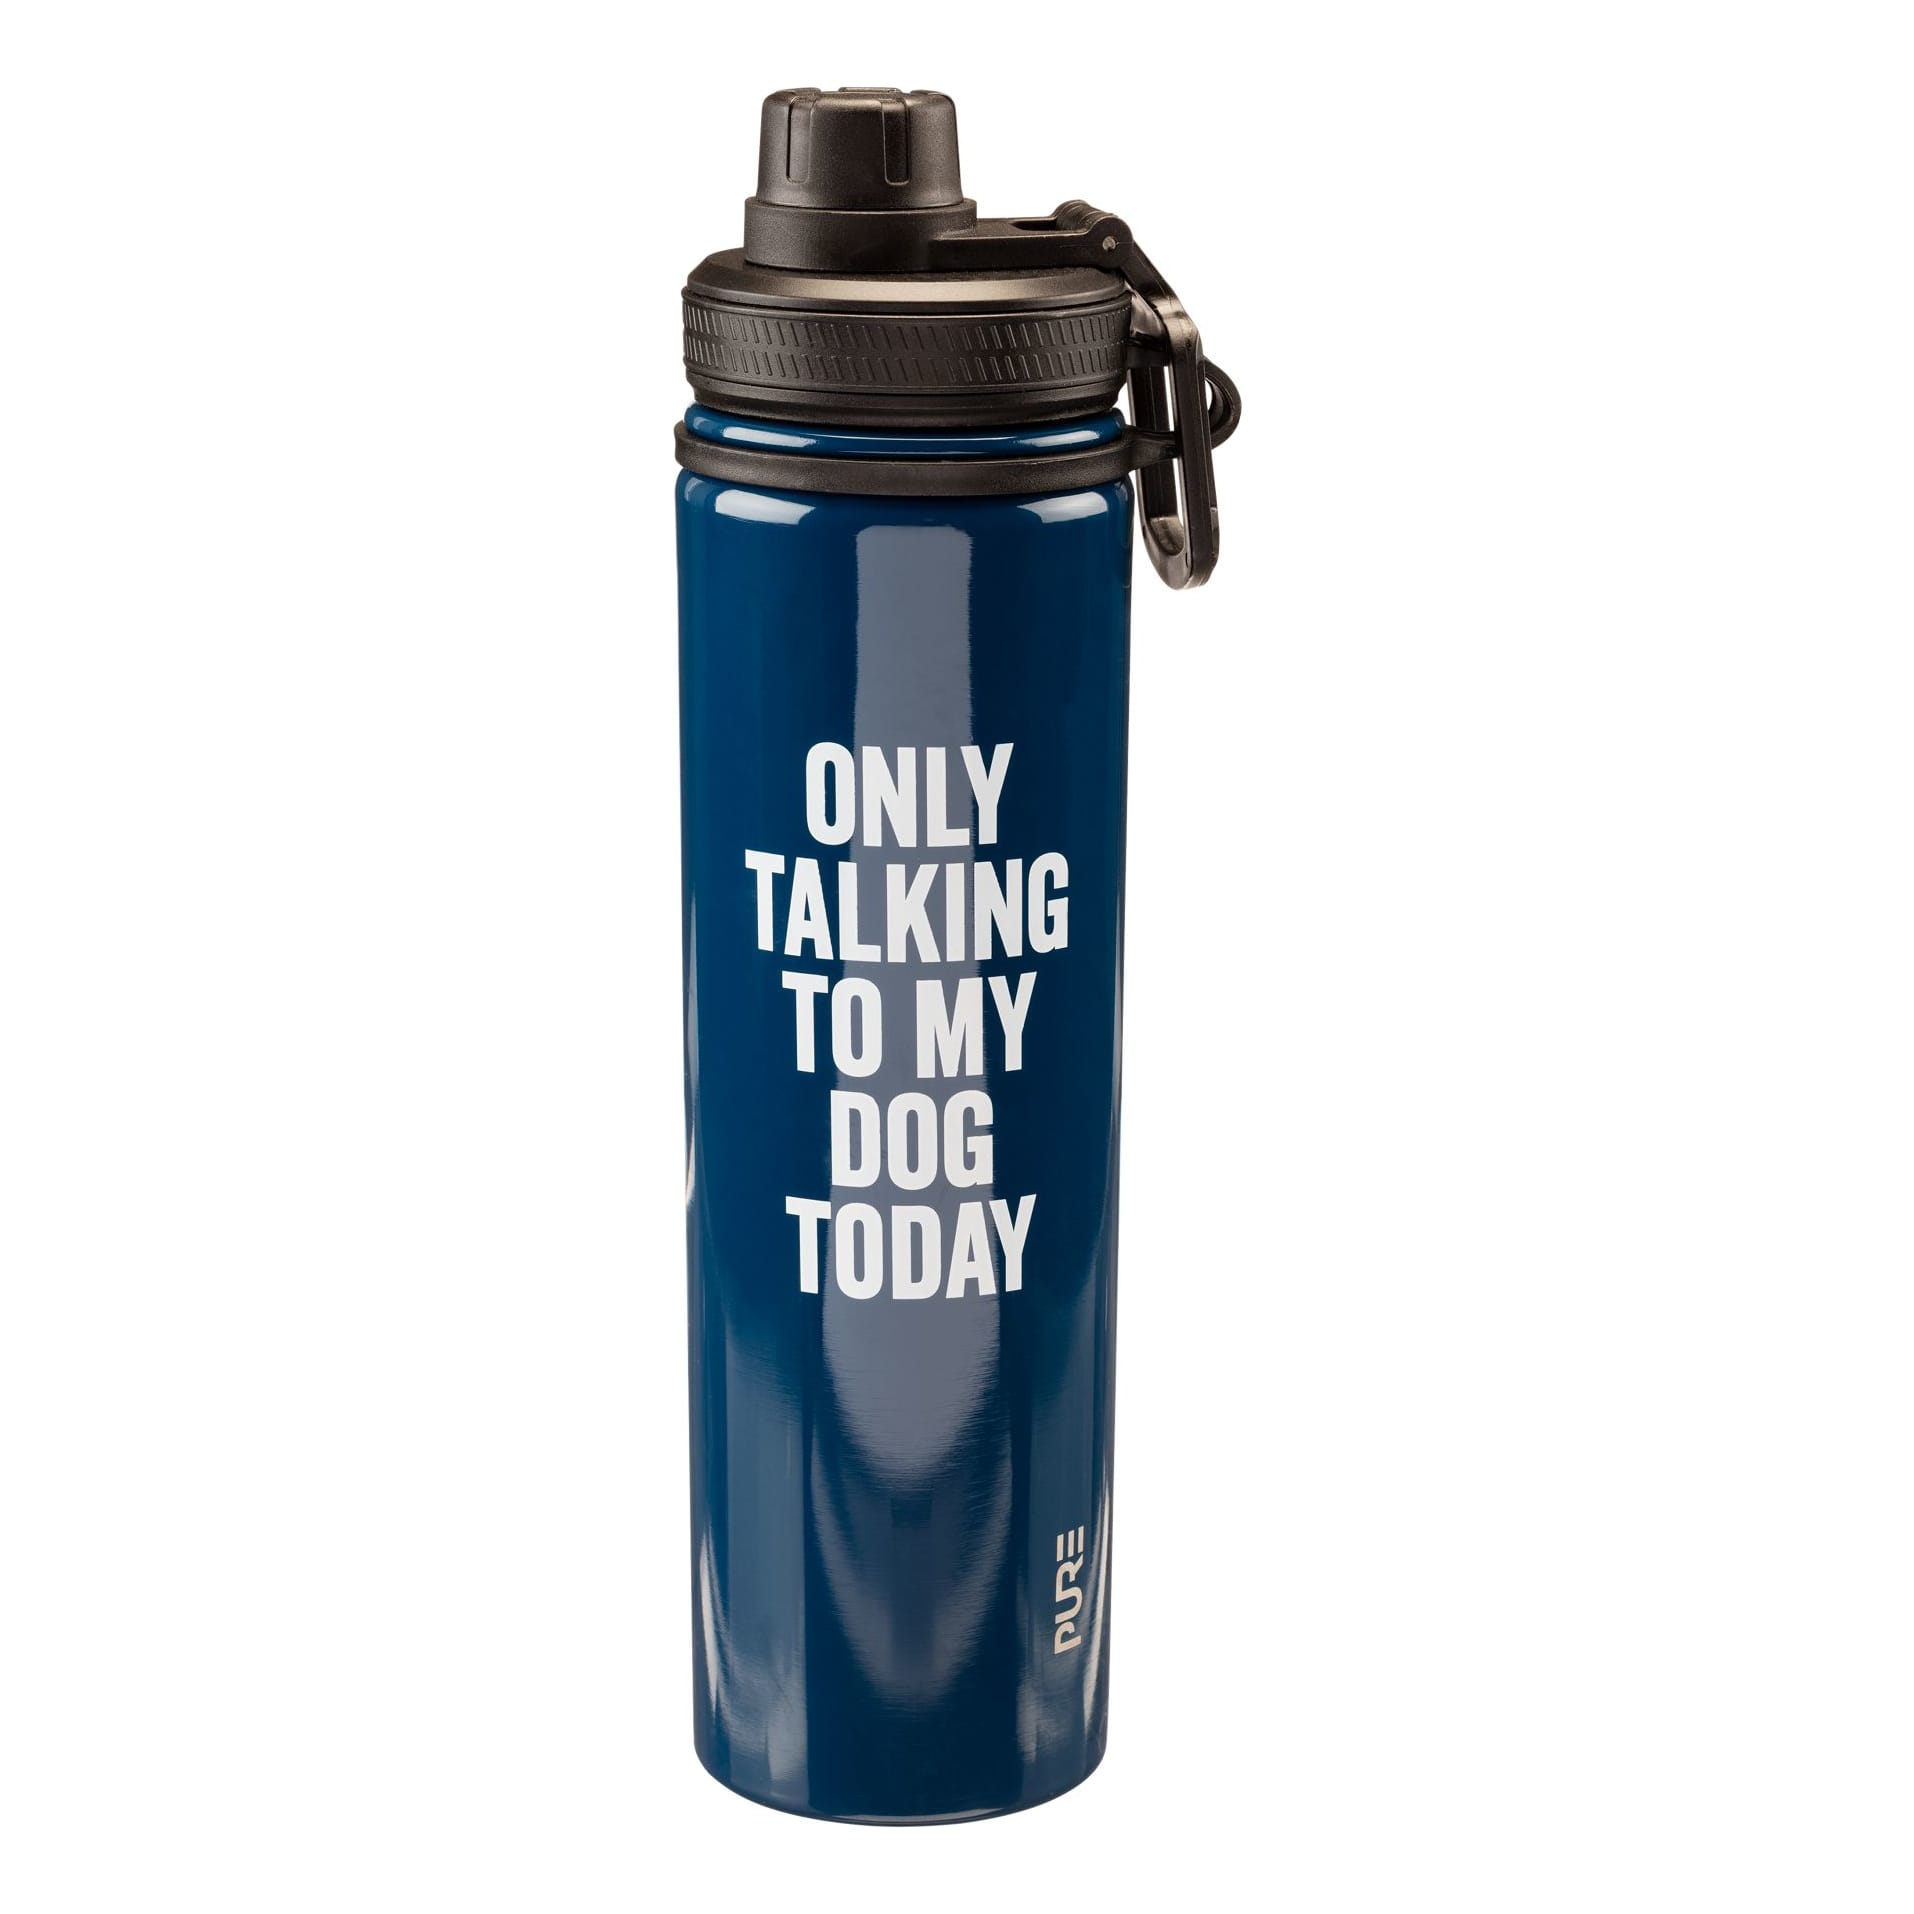 Under Armour Offgrid 32 oz Water Bottle